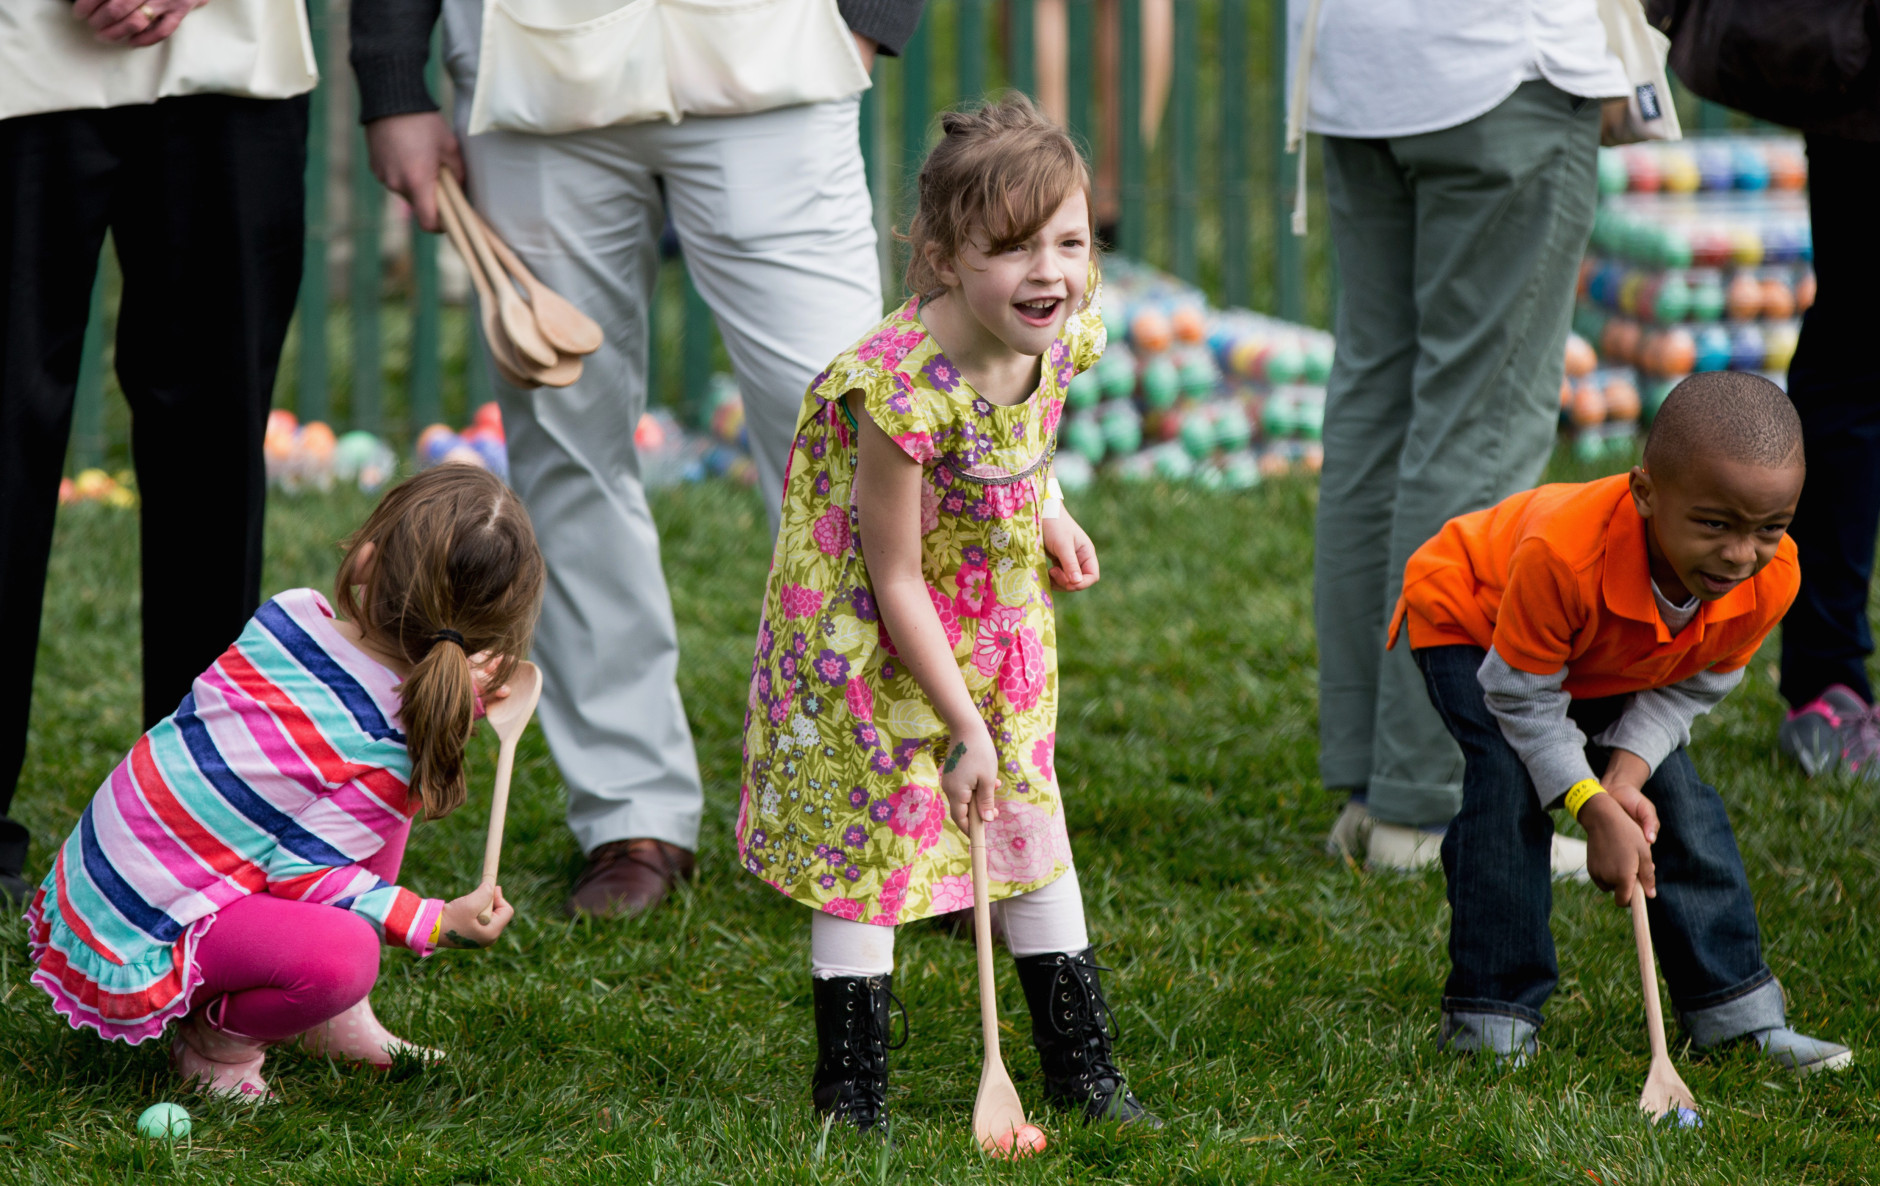 Children participate in the White House Easter Egg Roll on the South Lawn of the White House in Washington, Monday, March 28, 2016. Thousands of children gathered at the White House for the annual Easter Egg Roll. This year's event features  live music, sports courts, cooking stations, storytelling, and Easter egg rolling. (AP Photo/Andrew Harnik)